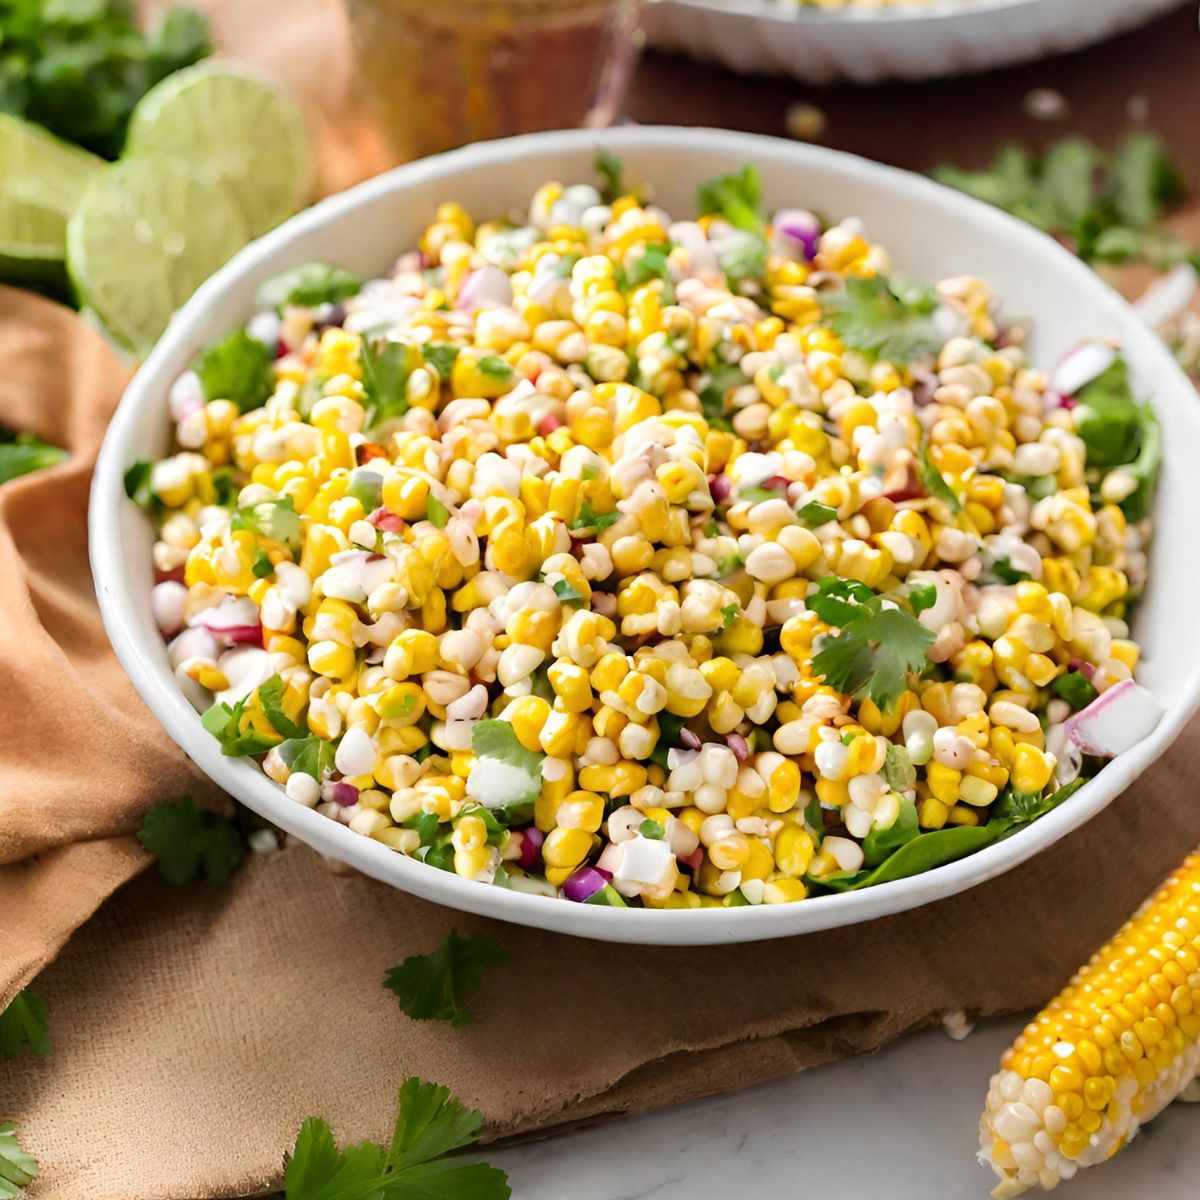 "Zesty Mexican Corn Salad (With a Spicy Twist!)"